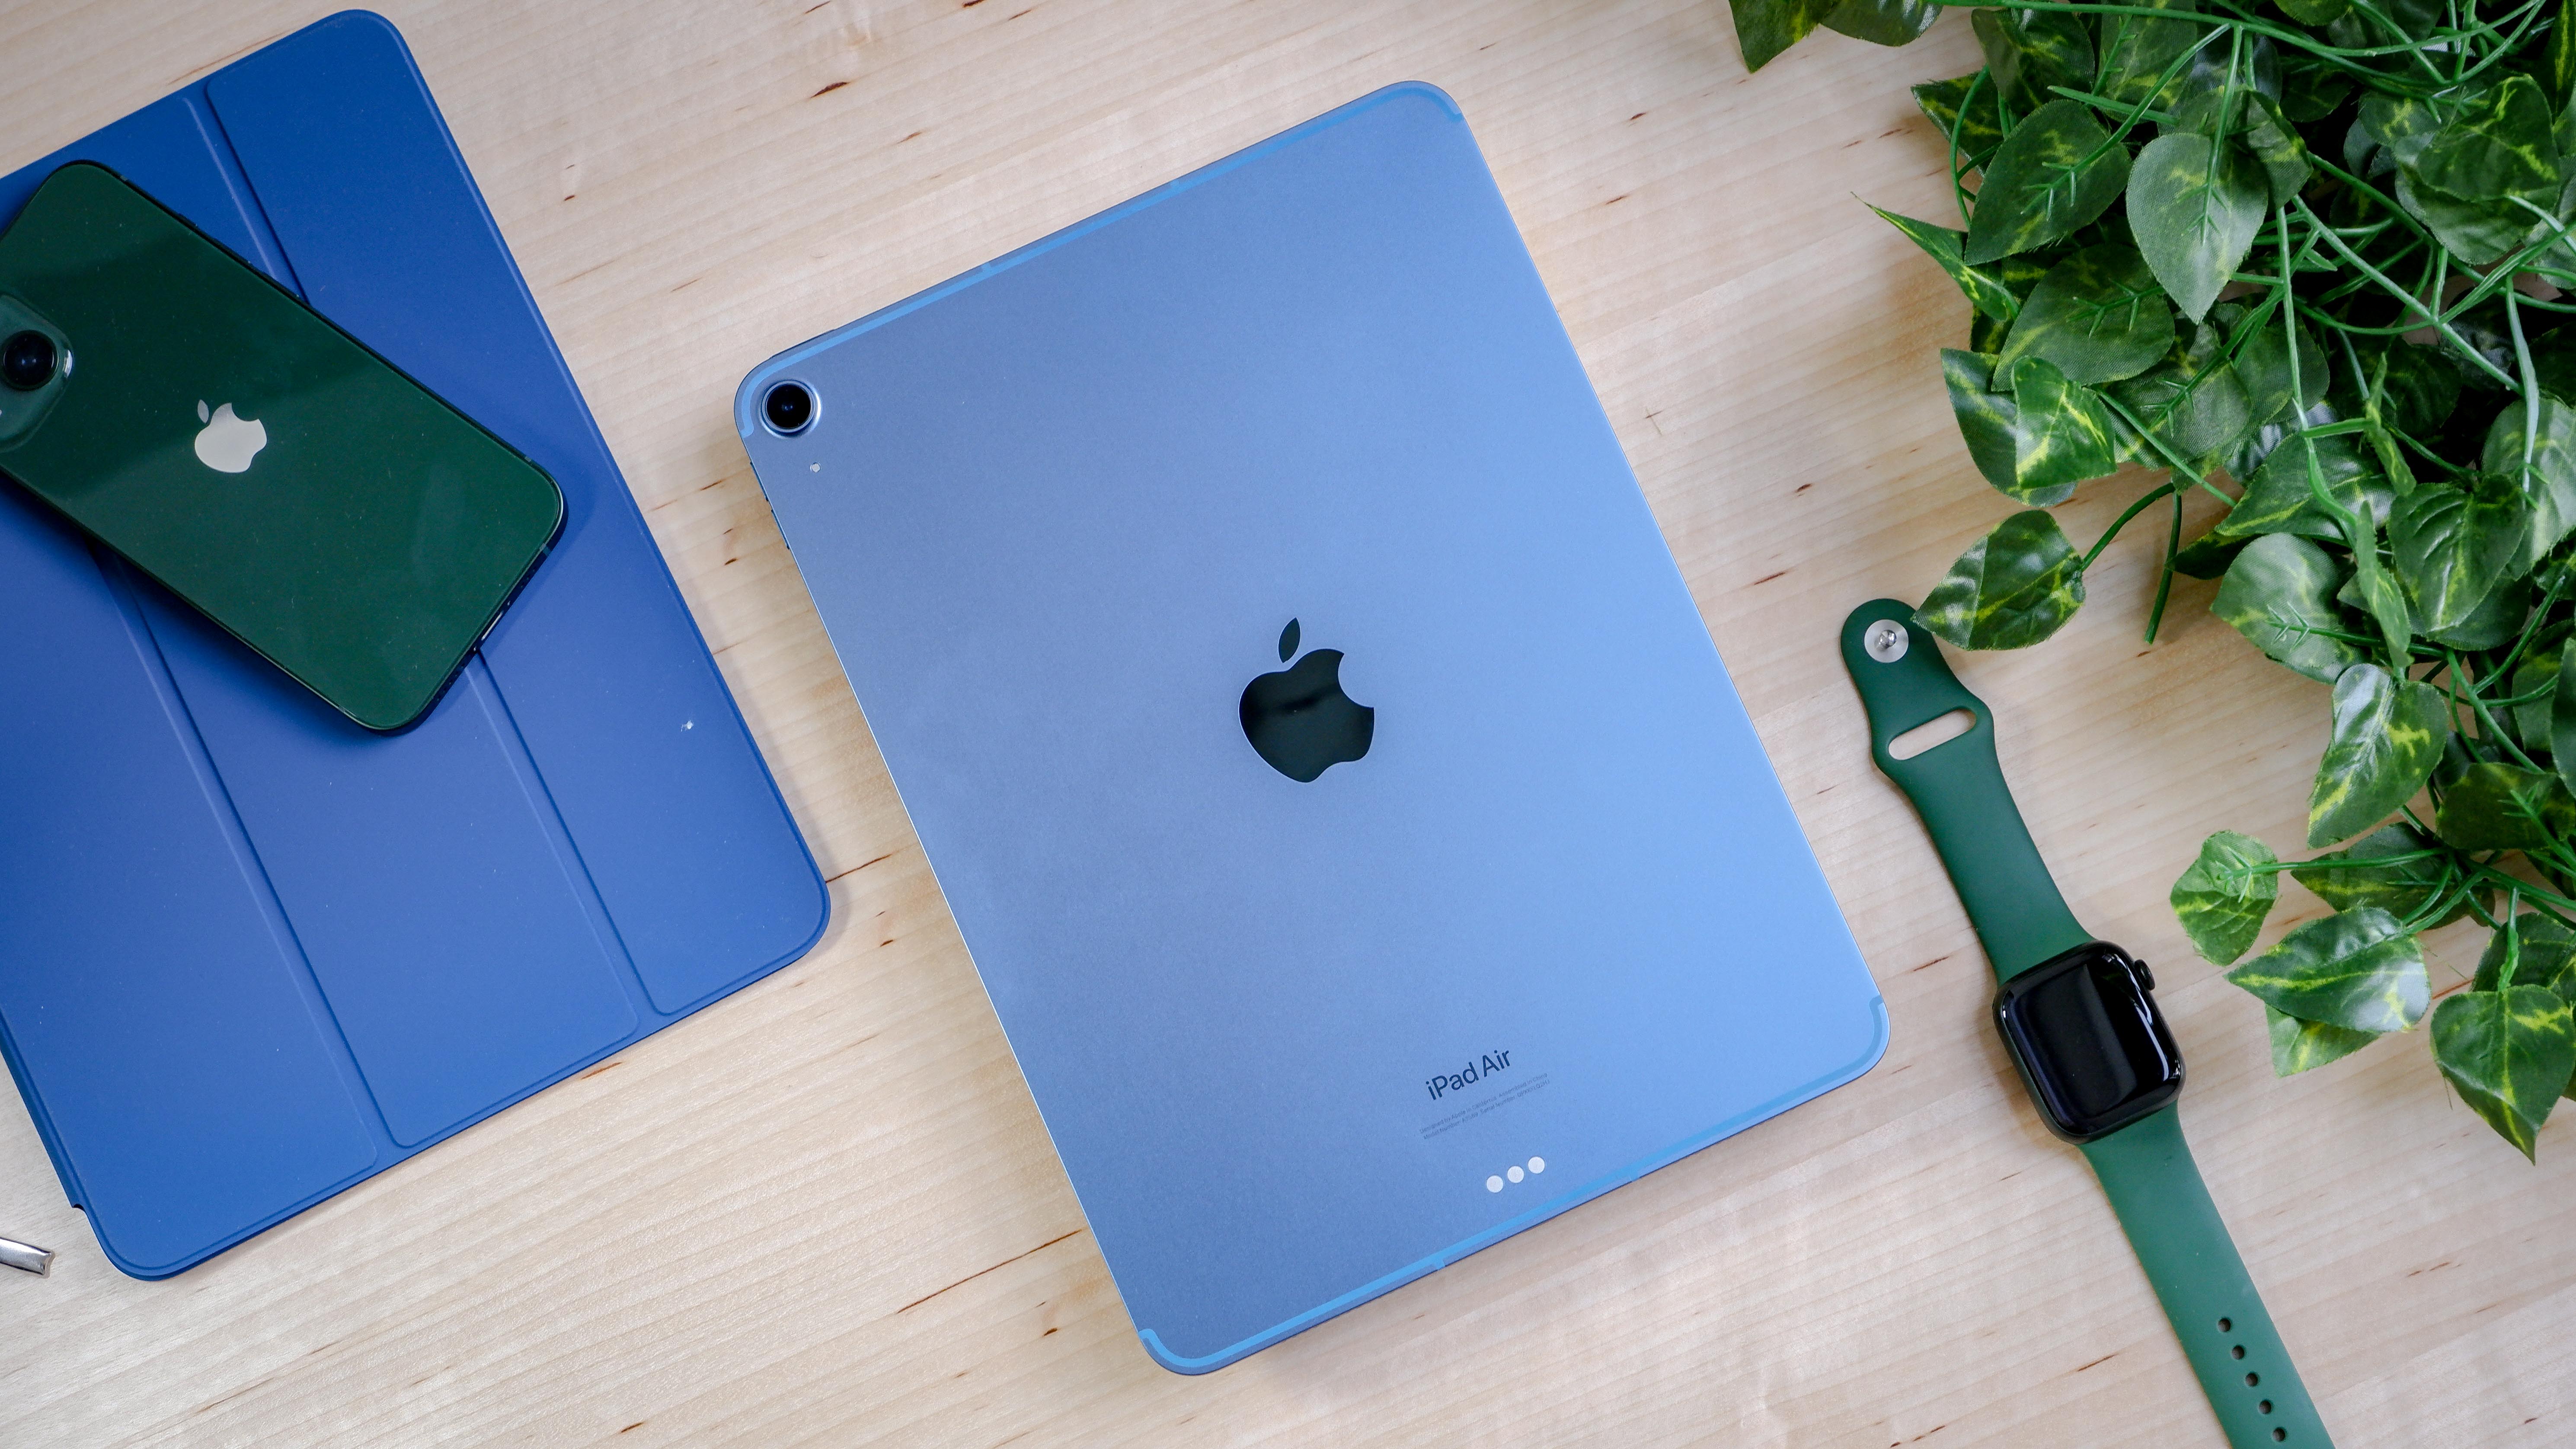 Best iPad 2024: Which iPad to buy